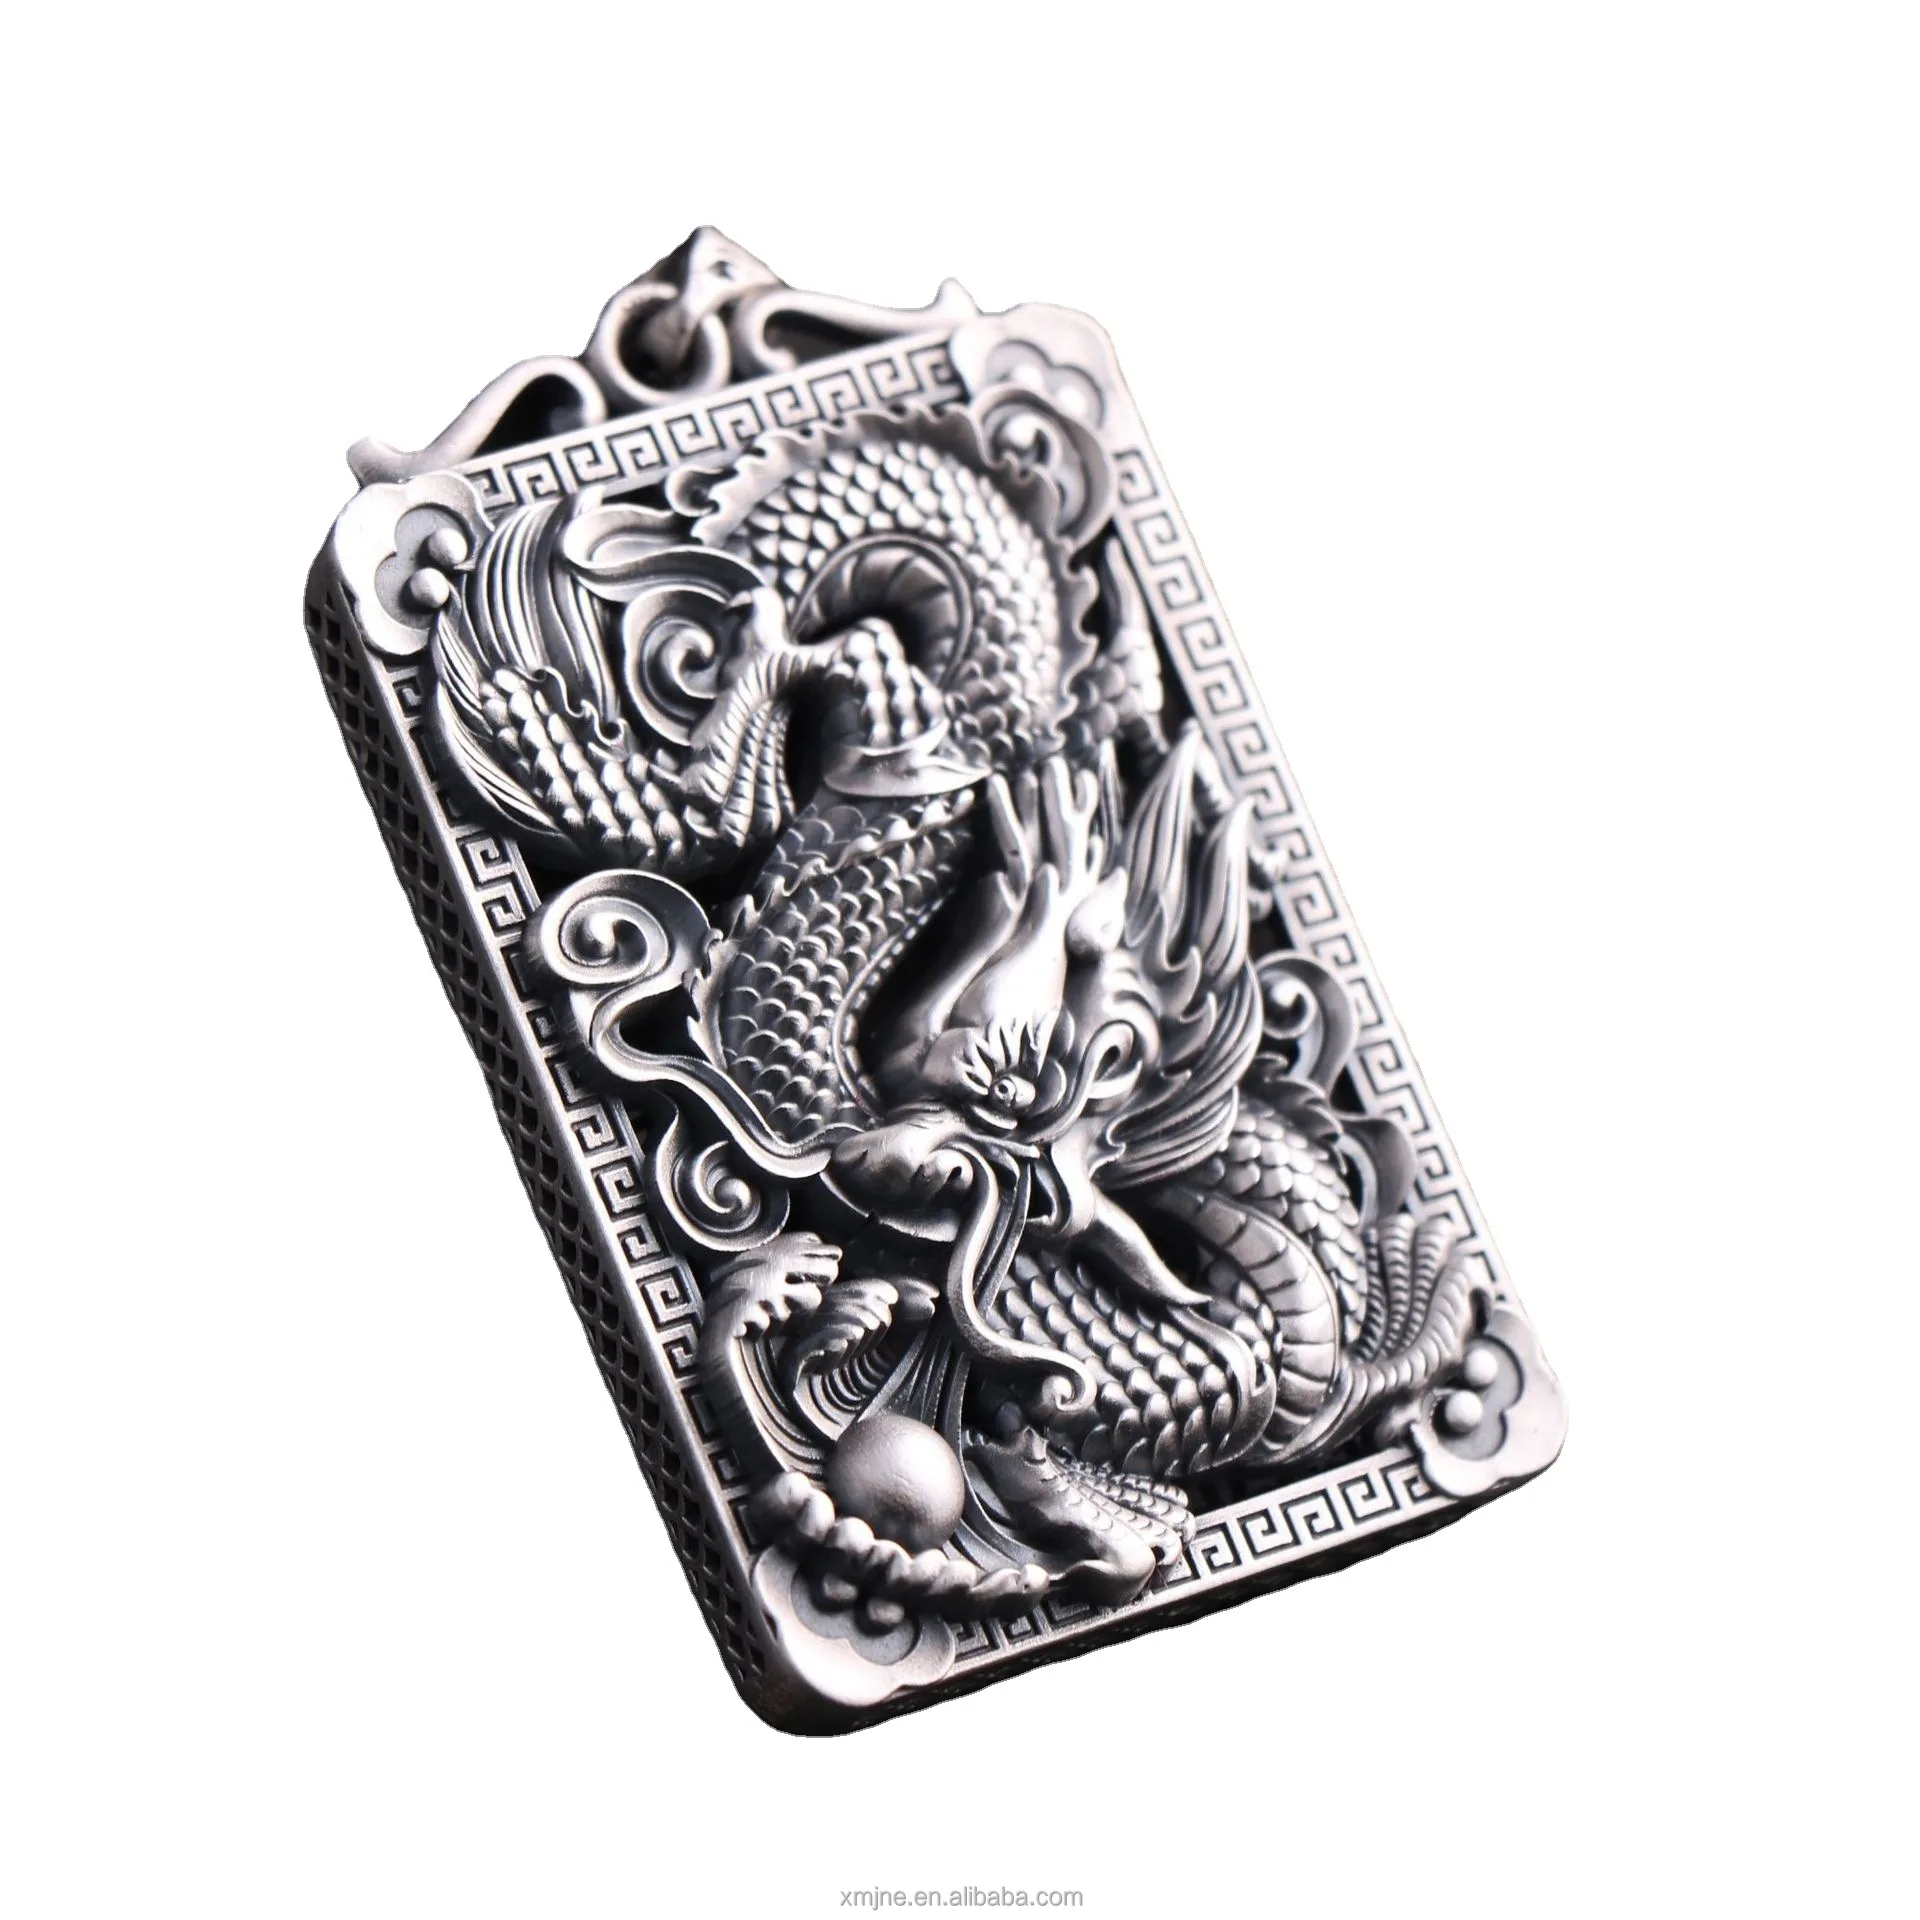 

Certified S999 Vintage Sterling Silver Three-Dimensional Relief Domineering Hollowed Out Men's Dragon World Pendant